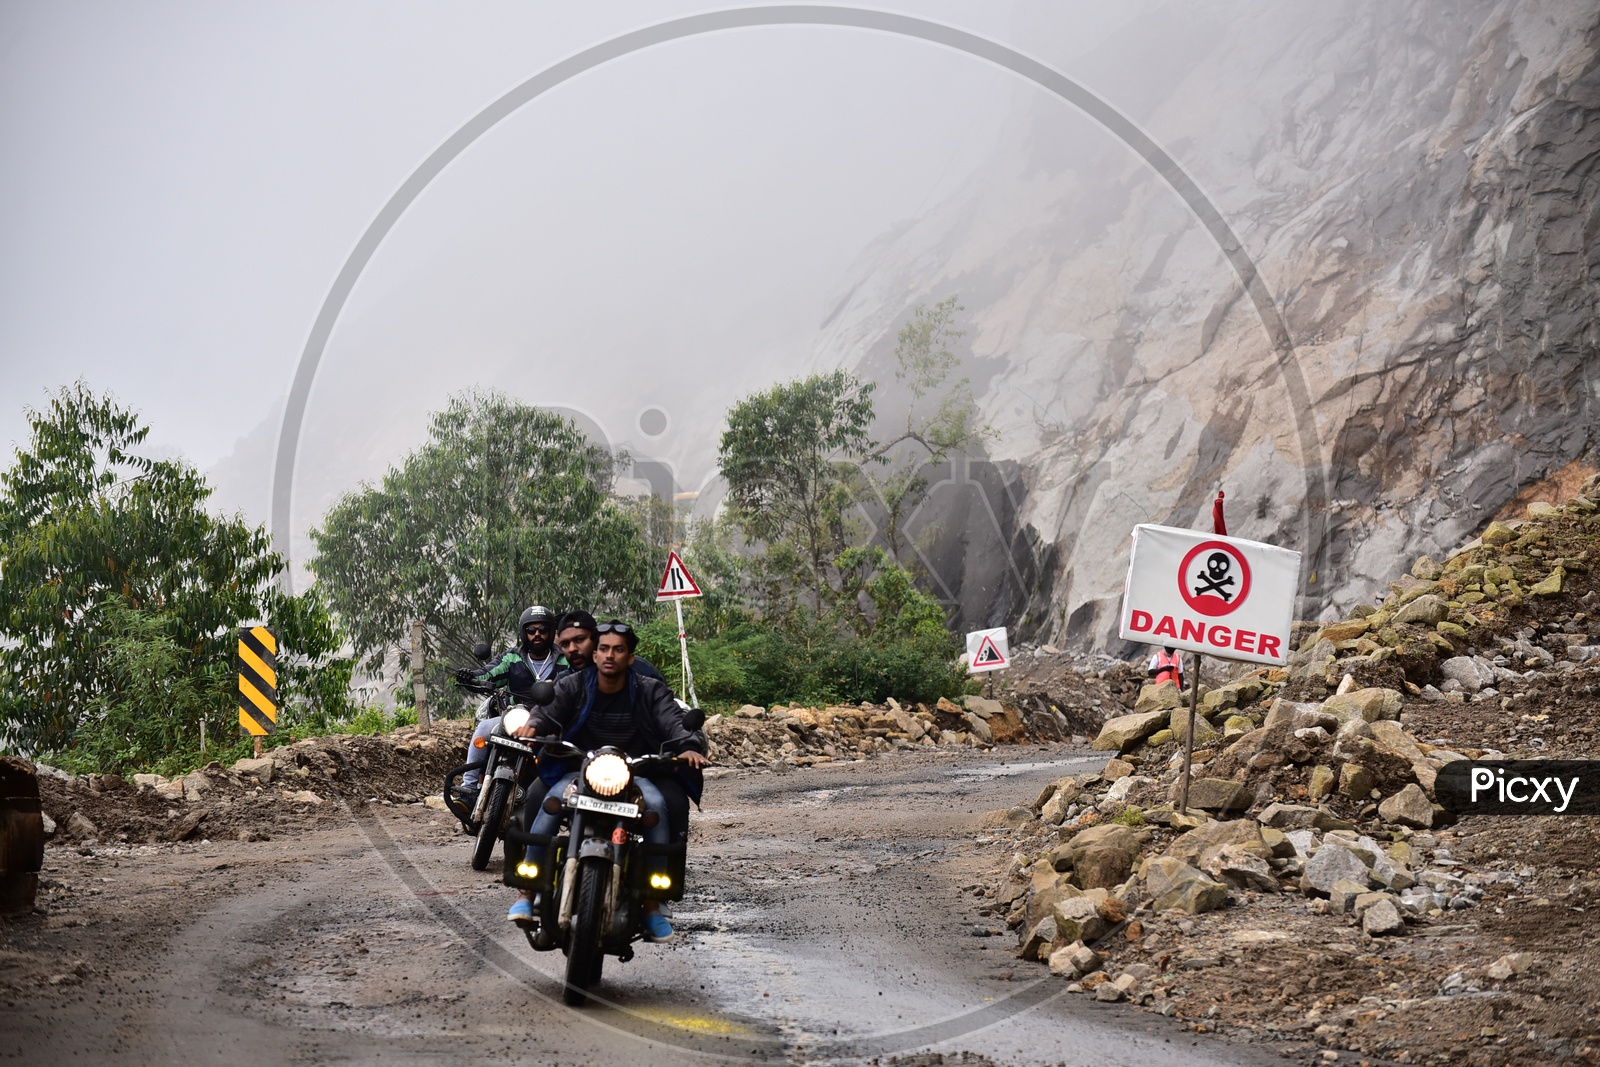 Bikers On Roads Of Munnar In Which Ganger Sign is Been Shown Besides The Road